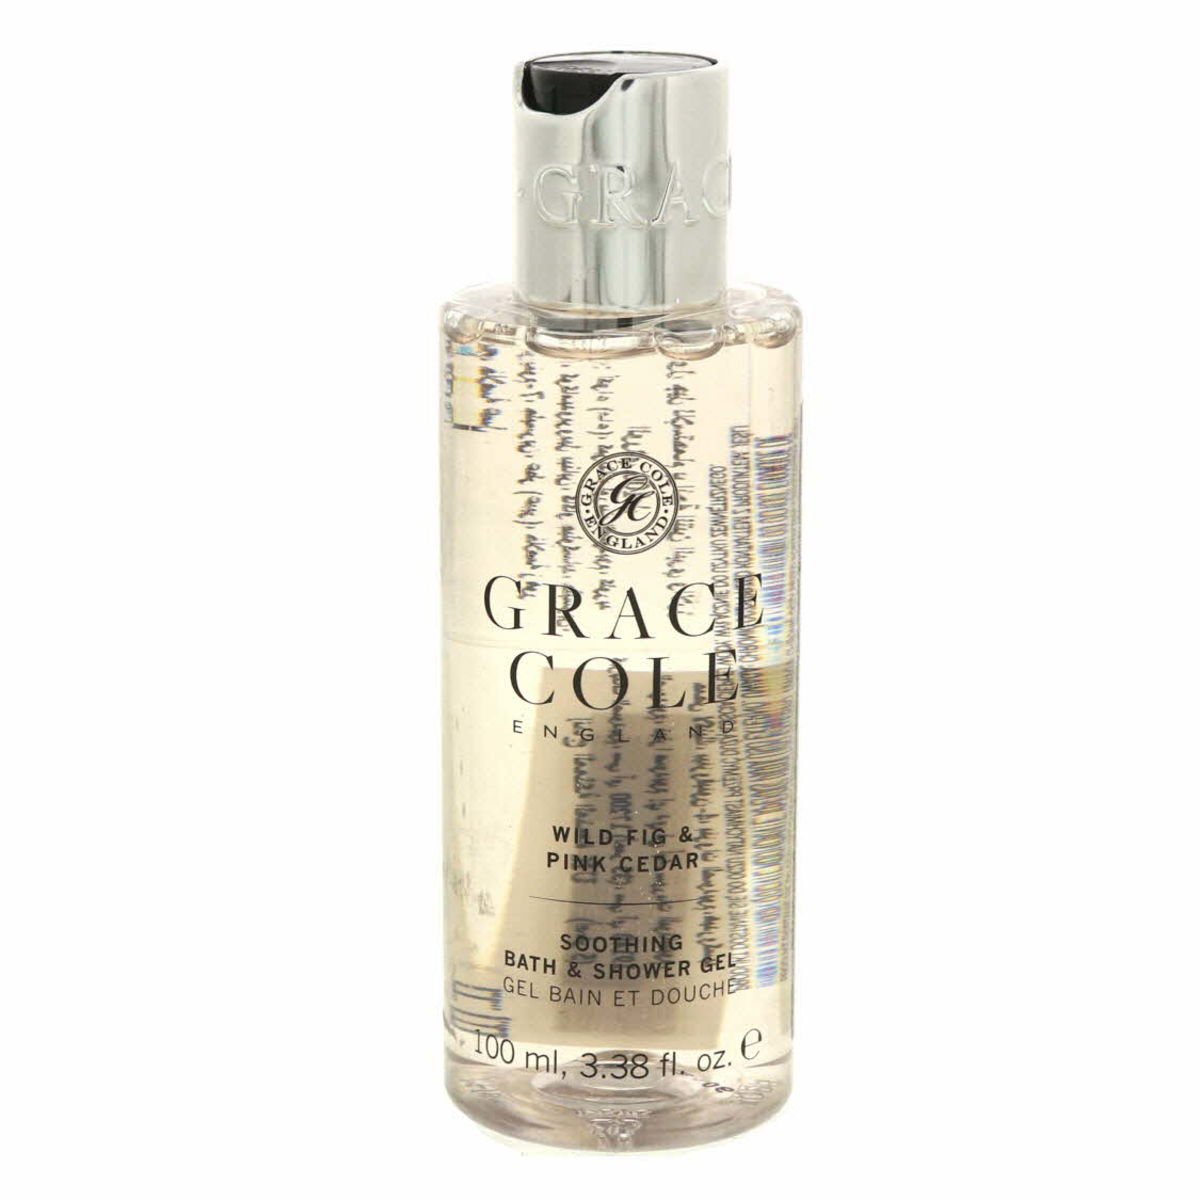 Grace Cole Soothing Bath And Shower Gel Wild Fig And Pink Cedar 100ml